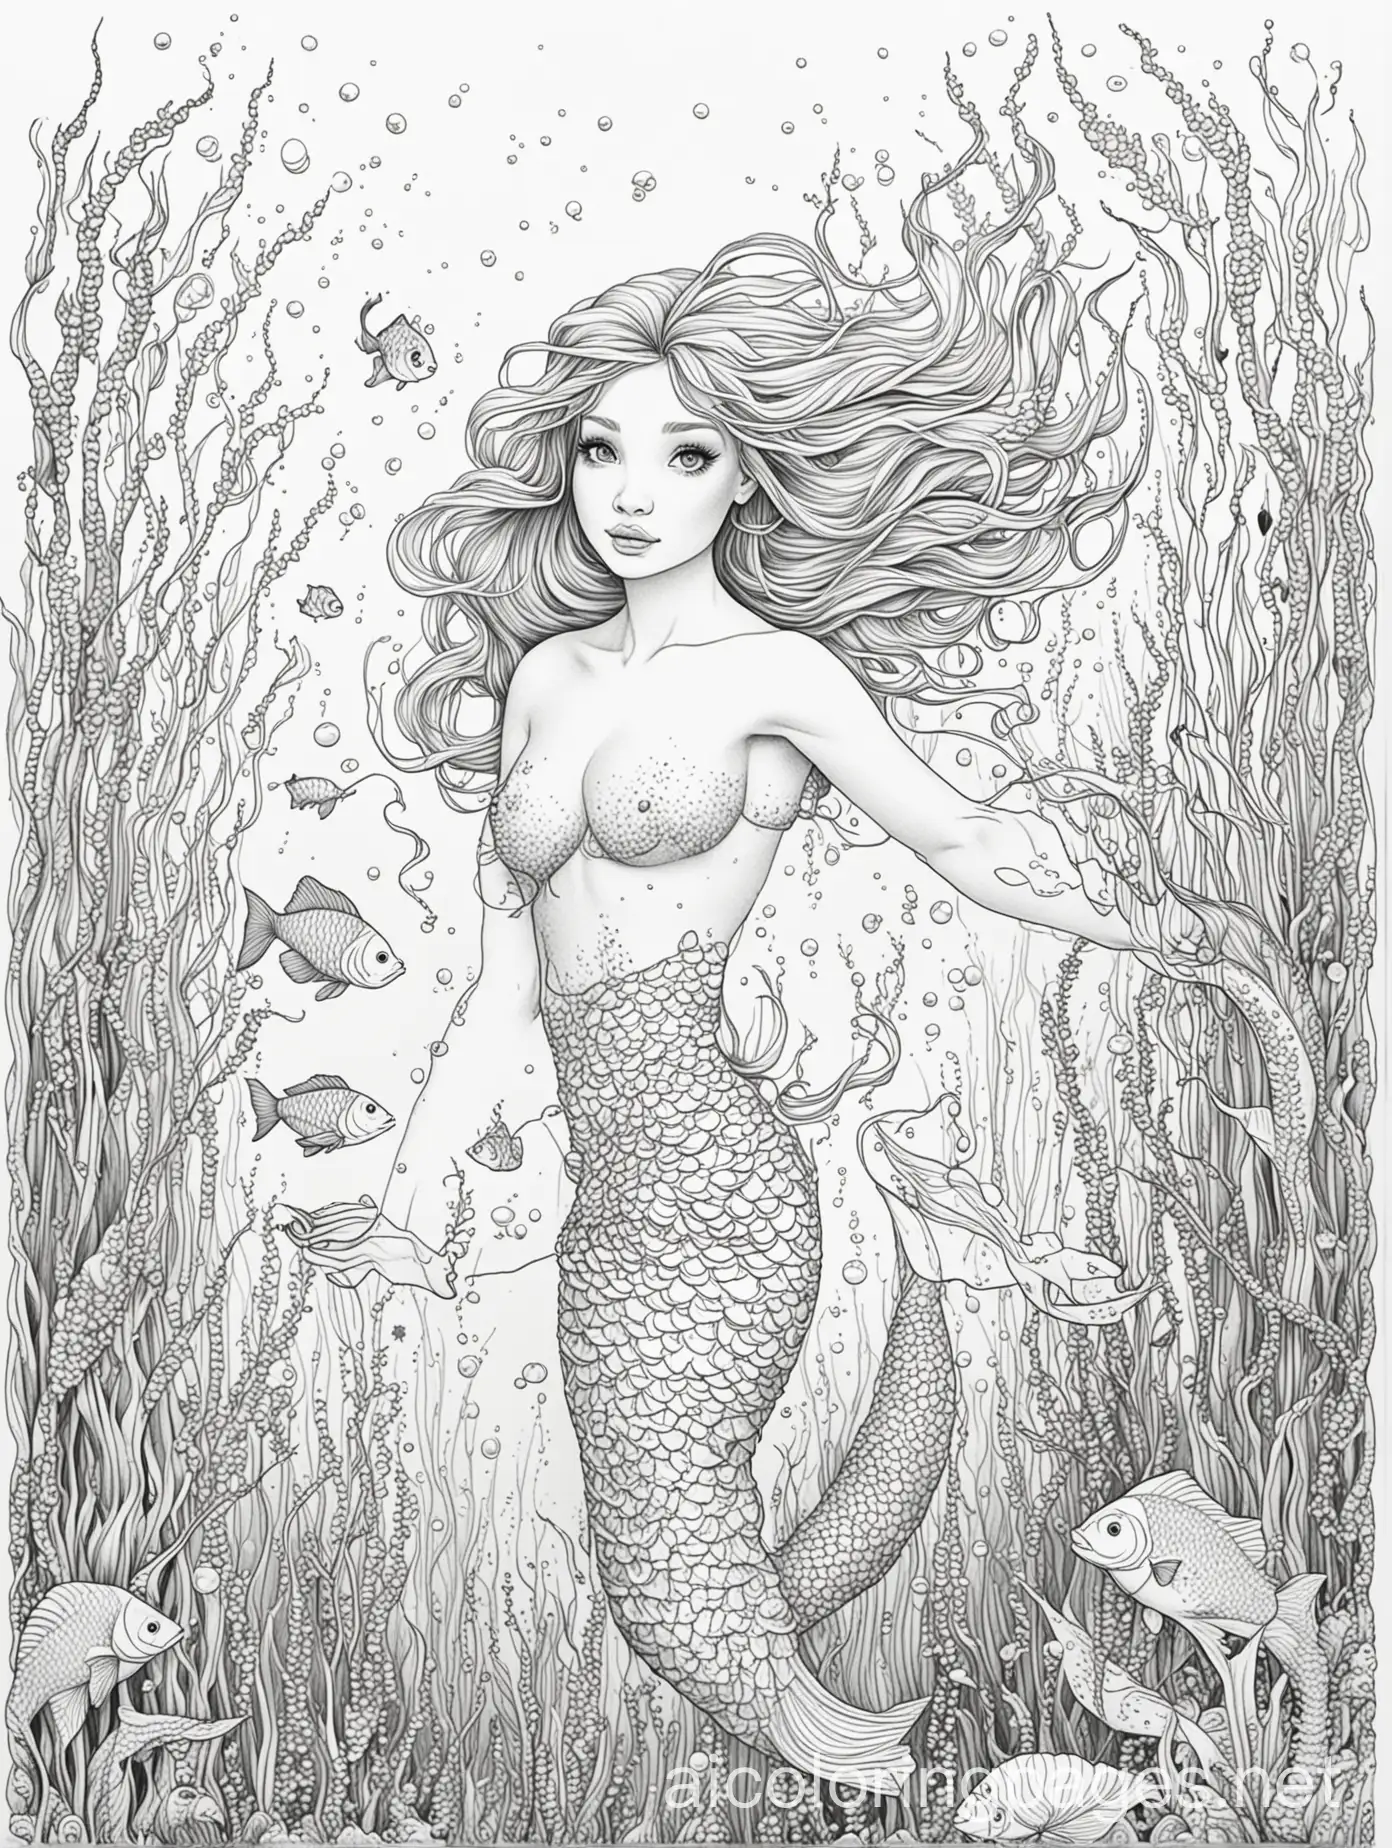 mermaid swimming through seaweed with fish, Coloring Page, black and white, line art, white background, Simplicity, Ample White Space